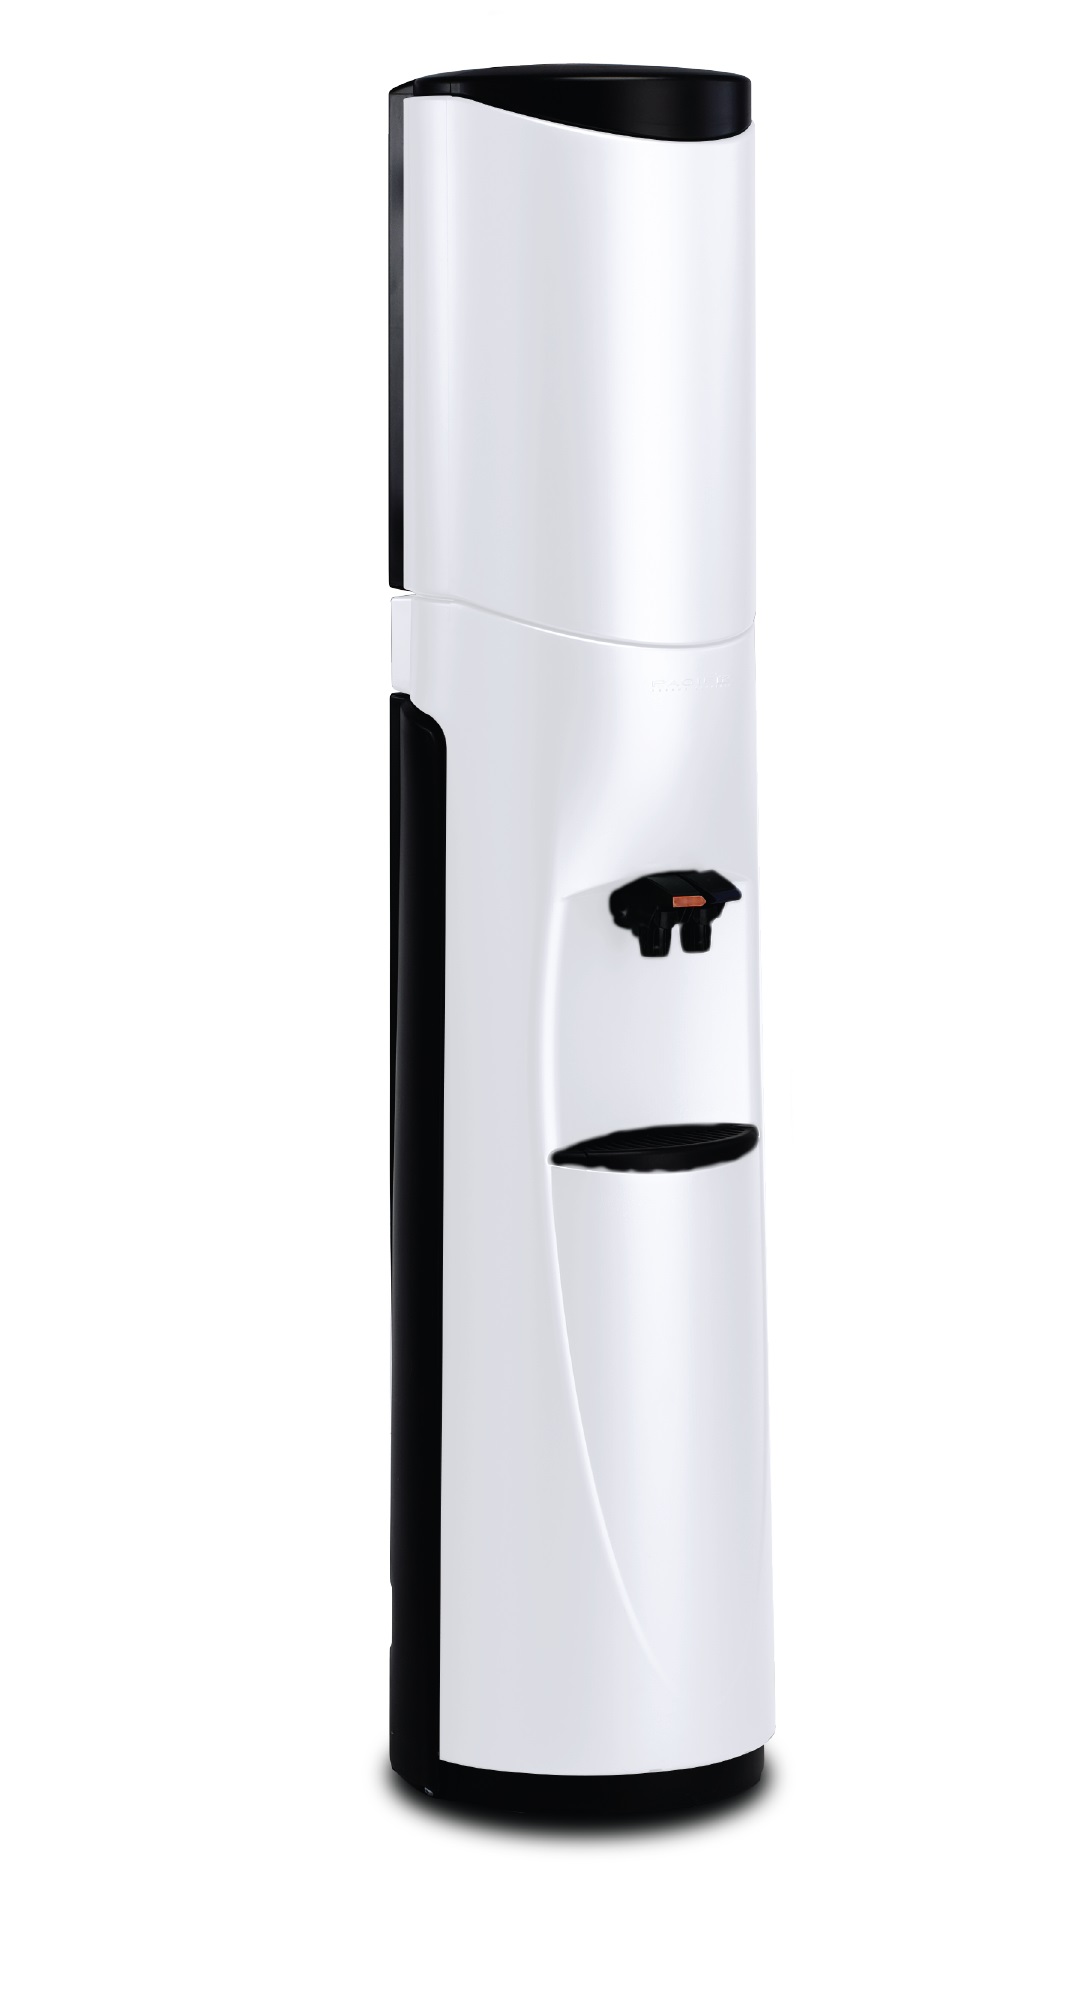 Pacifik Water Cooler - White with Black Trim - New technology for a whole new kind of bottled water cooler, Hot & Cold